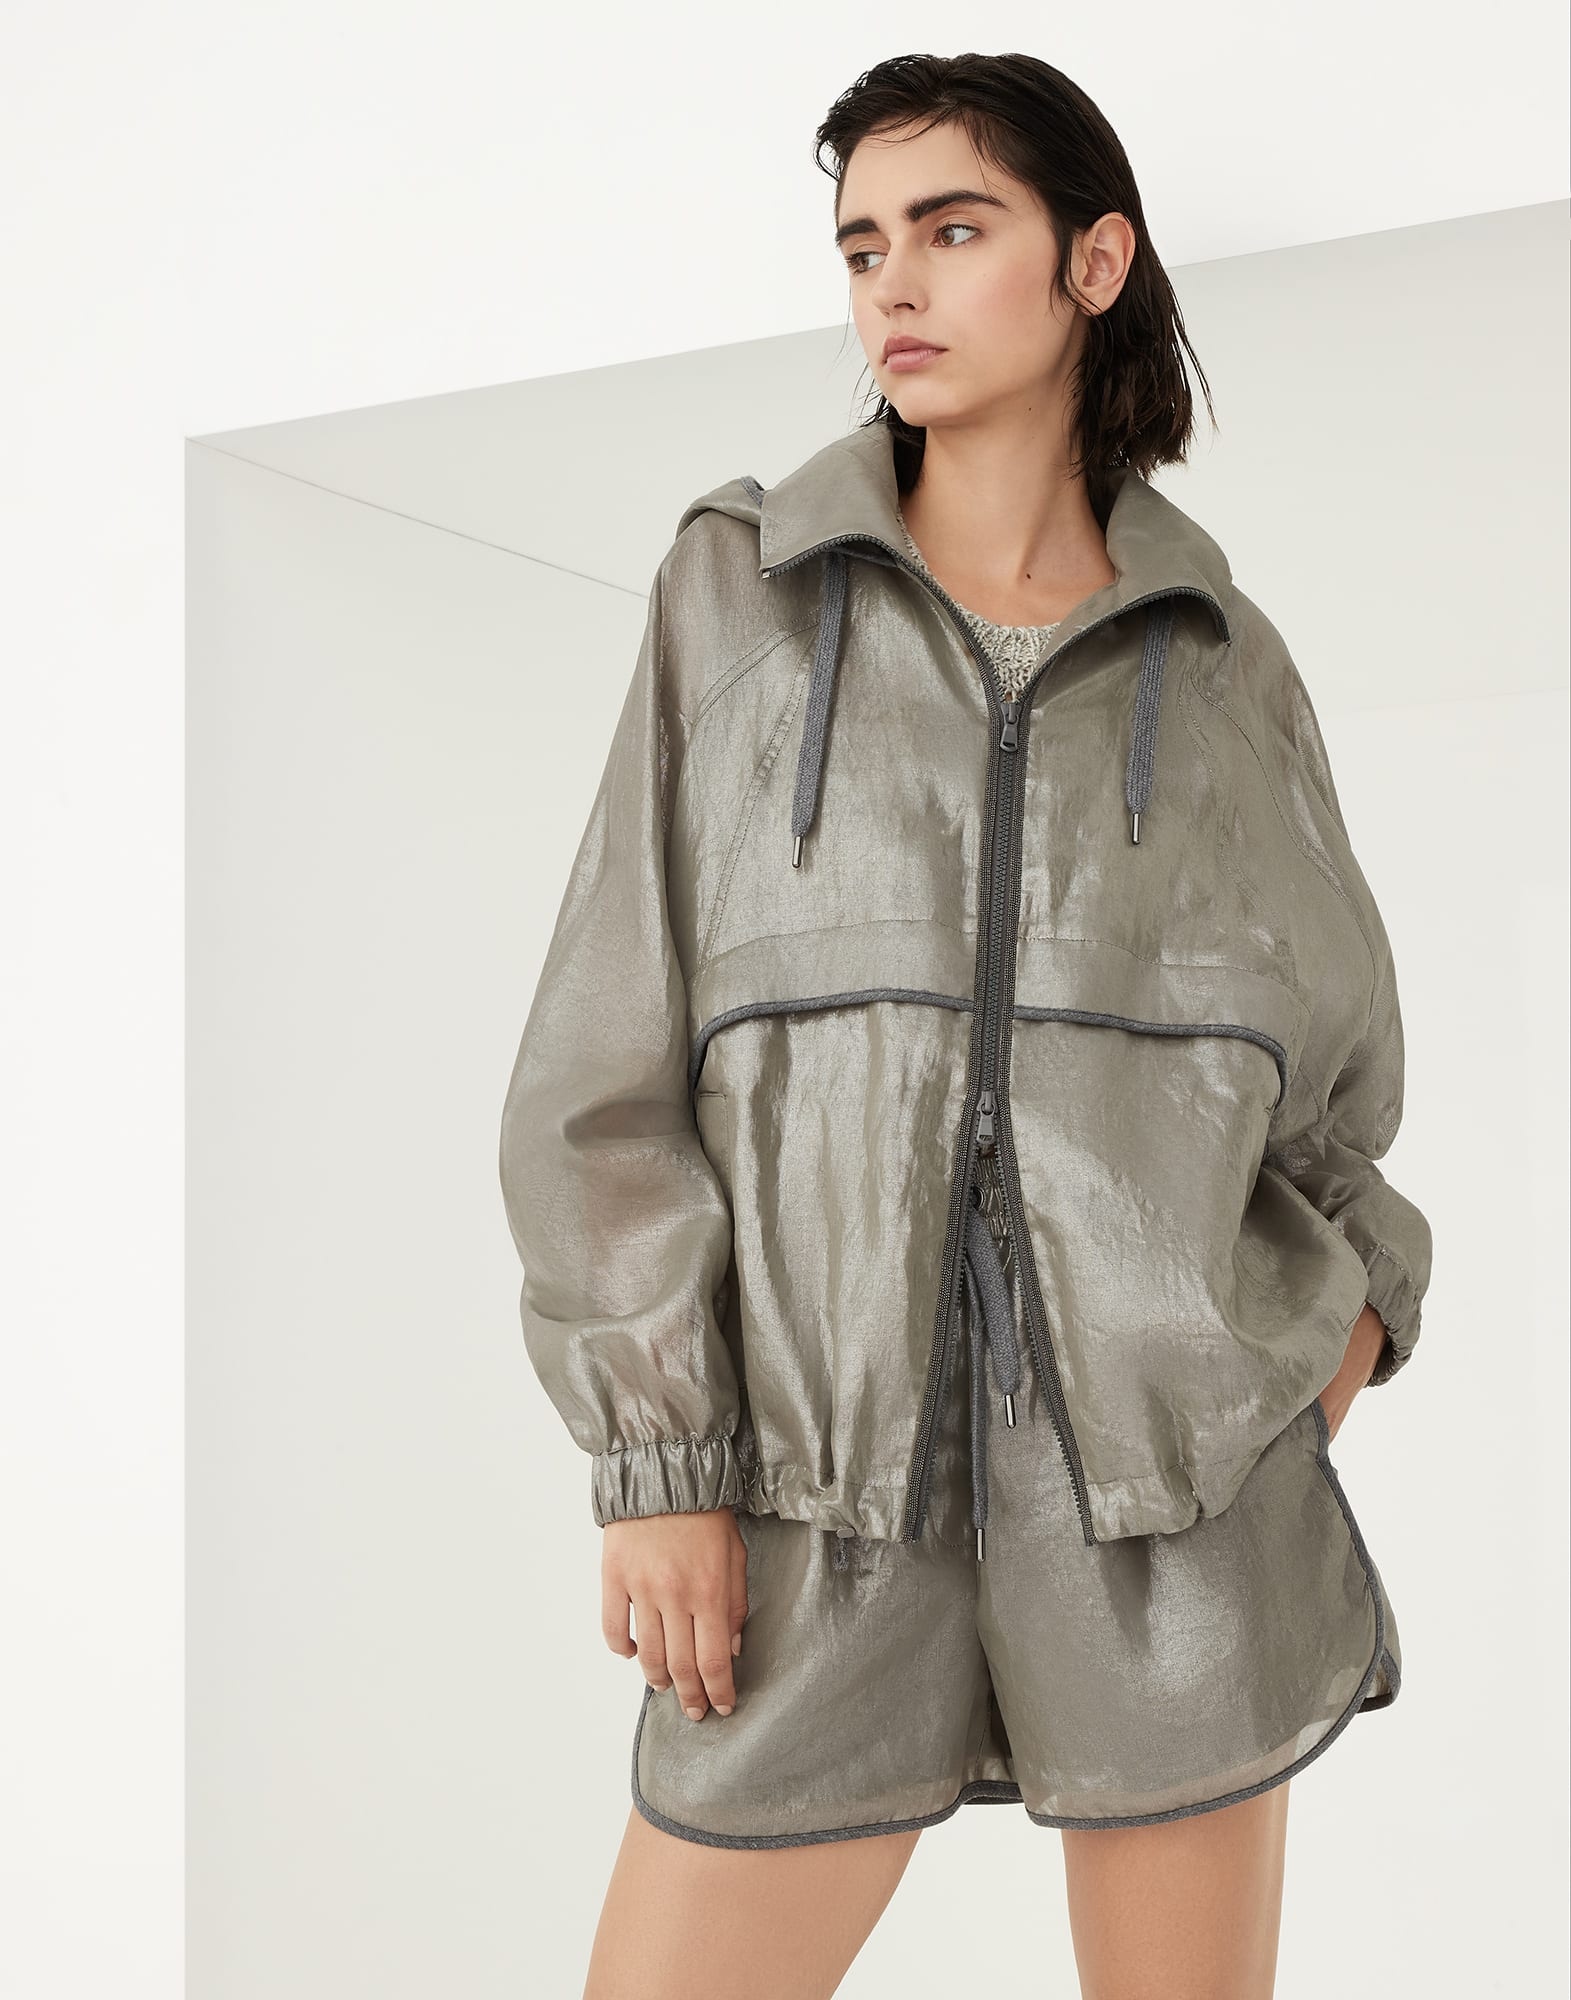 Lamé cotton gauze hooded outerwear jacket with shiny trims - 1